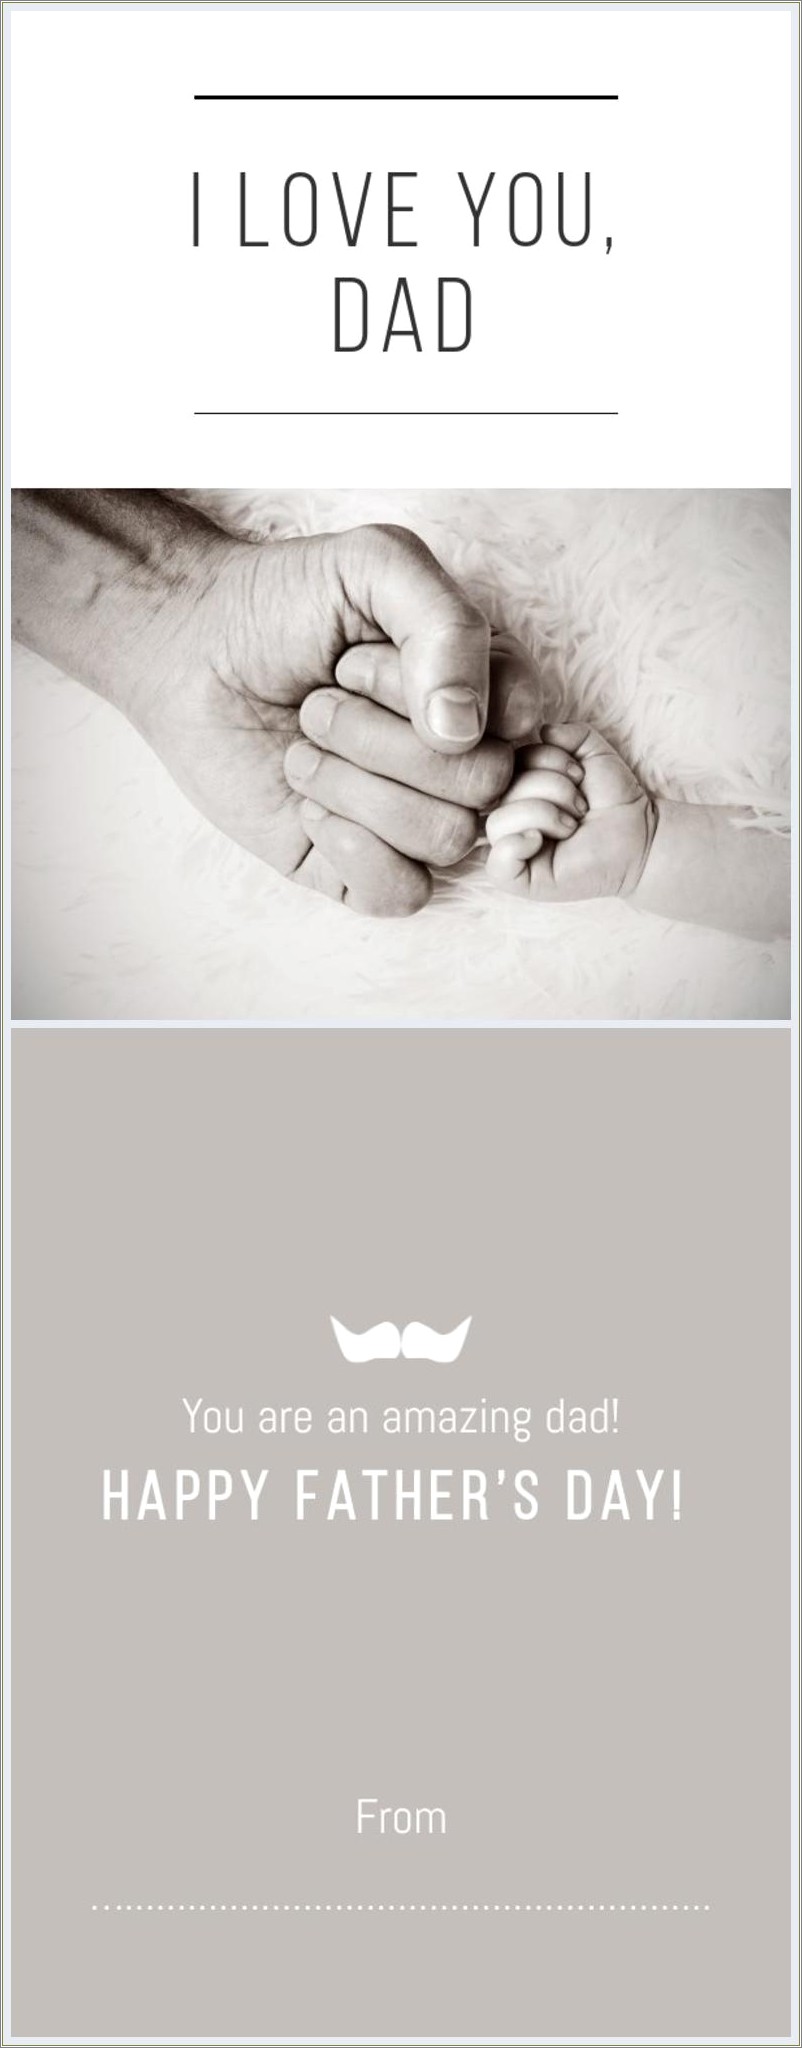 Happy Father's Day Modern Card Template Free